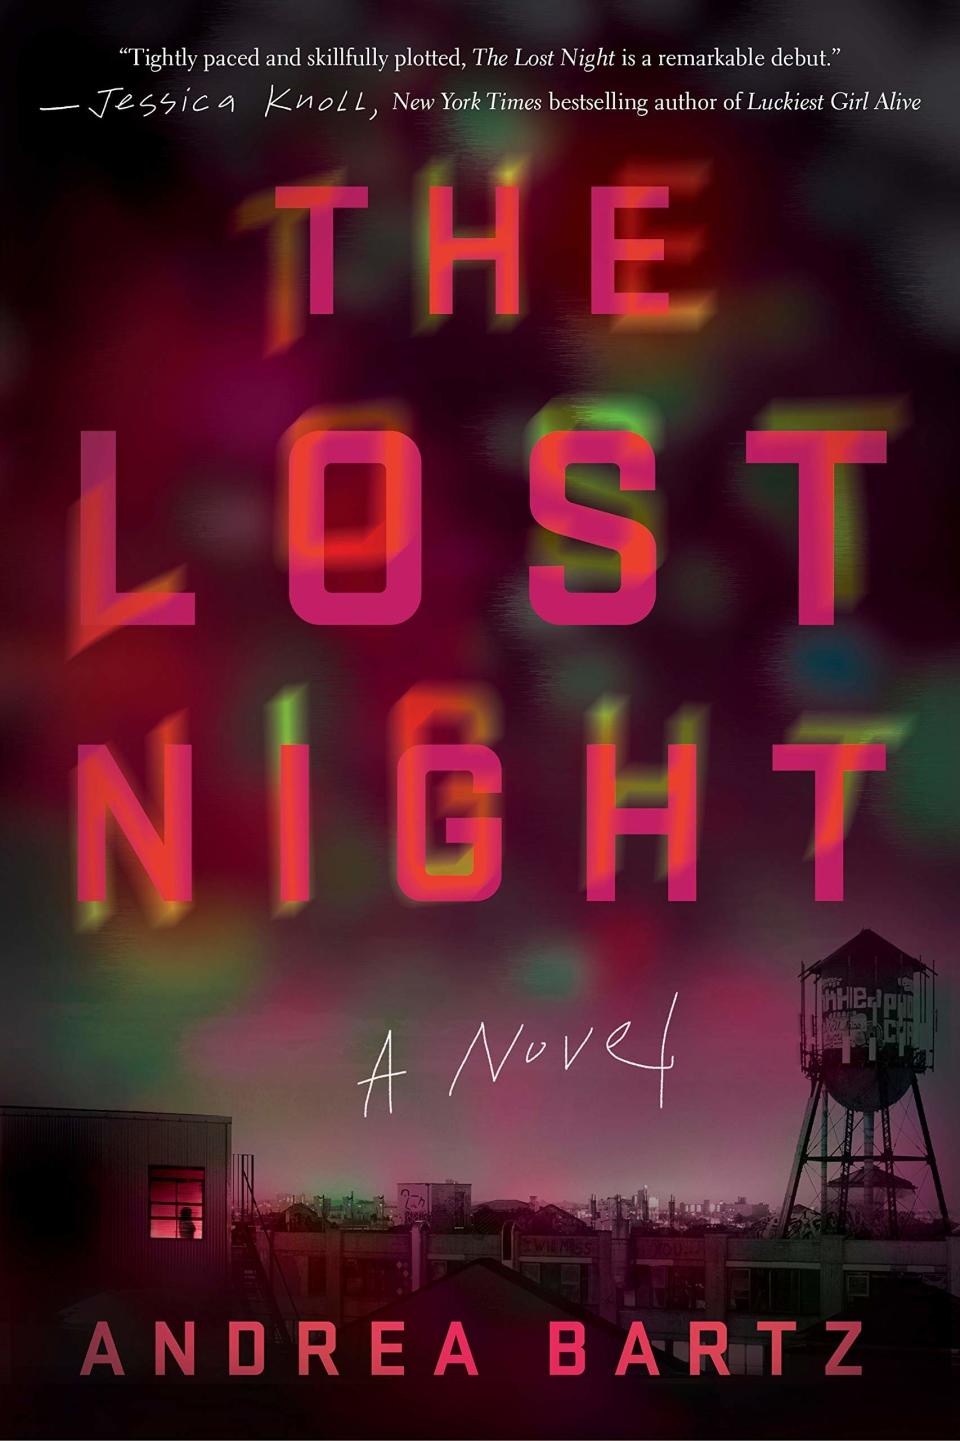 The Lost Night by Andrea Bartz (February 26)